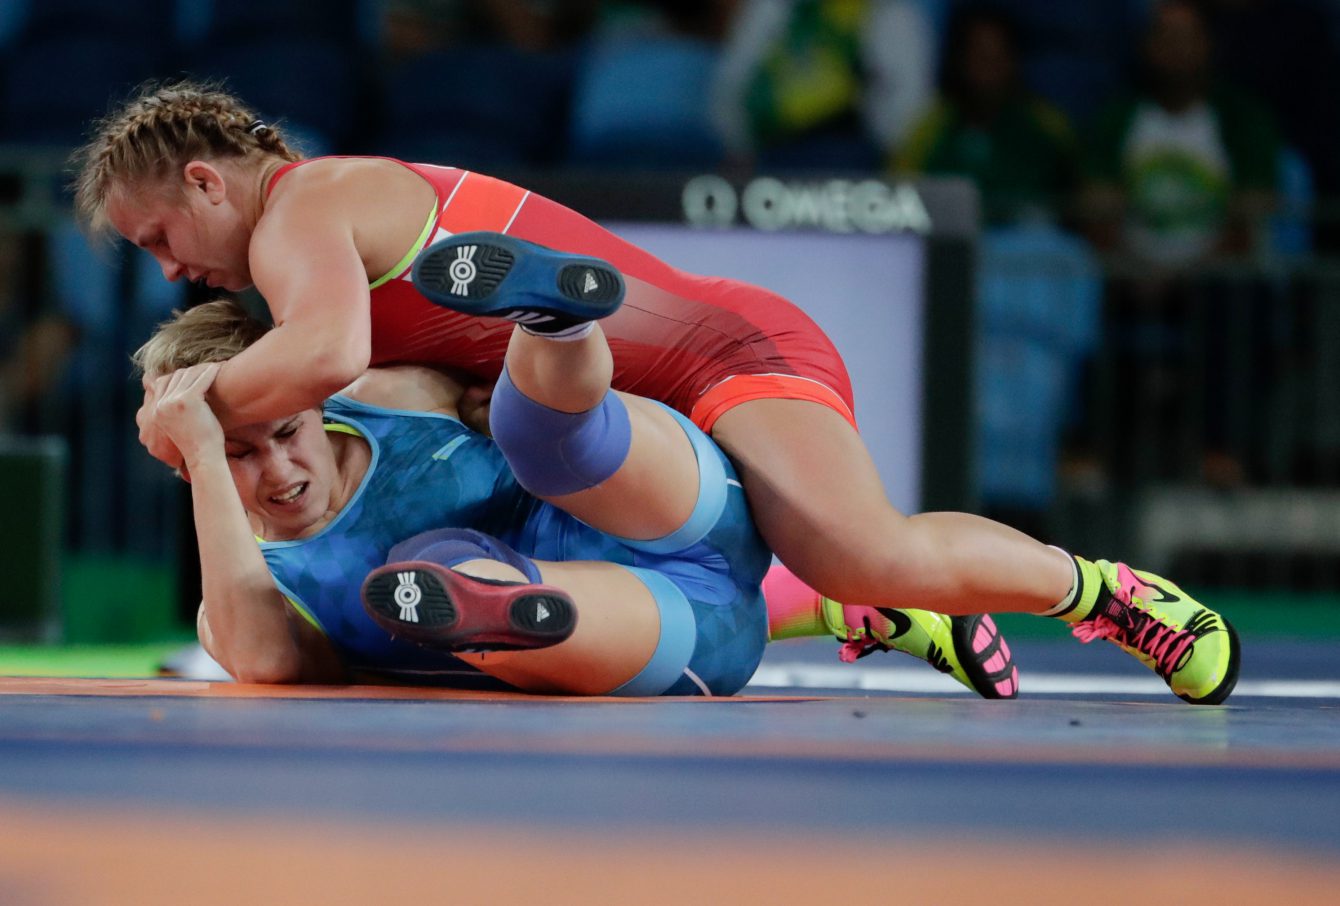 Canada's Erica Wiebe, in red, competes against Kazakhstan's Guzel Manyurova during the women's 75kg freestyle wrestling competition at the 2016 Summer Olympics in Rio de Janeiro, Brazil, Thursday, Aug. 18, 2016. (COC/Jason Ransom)